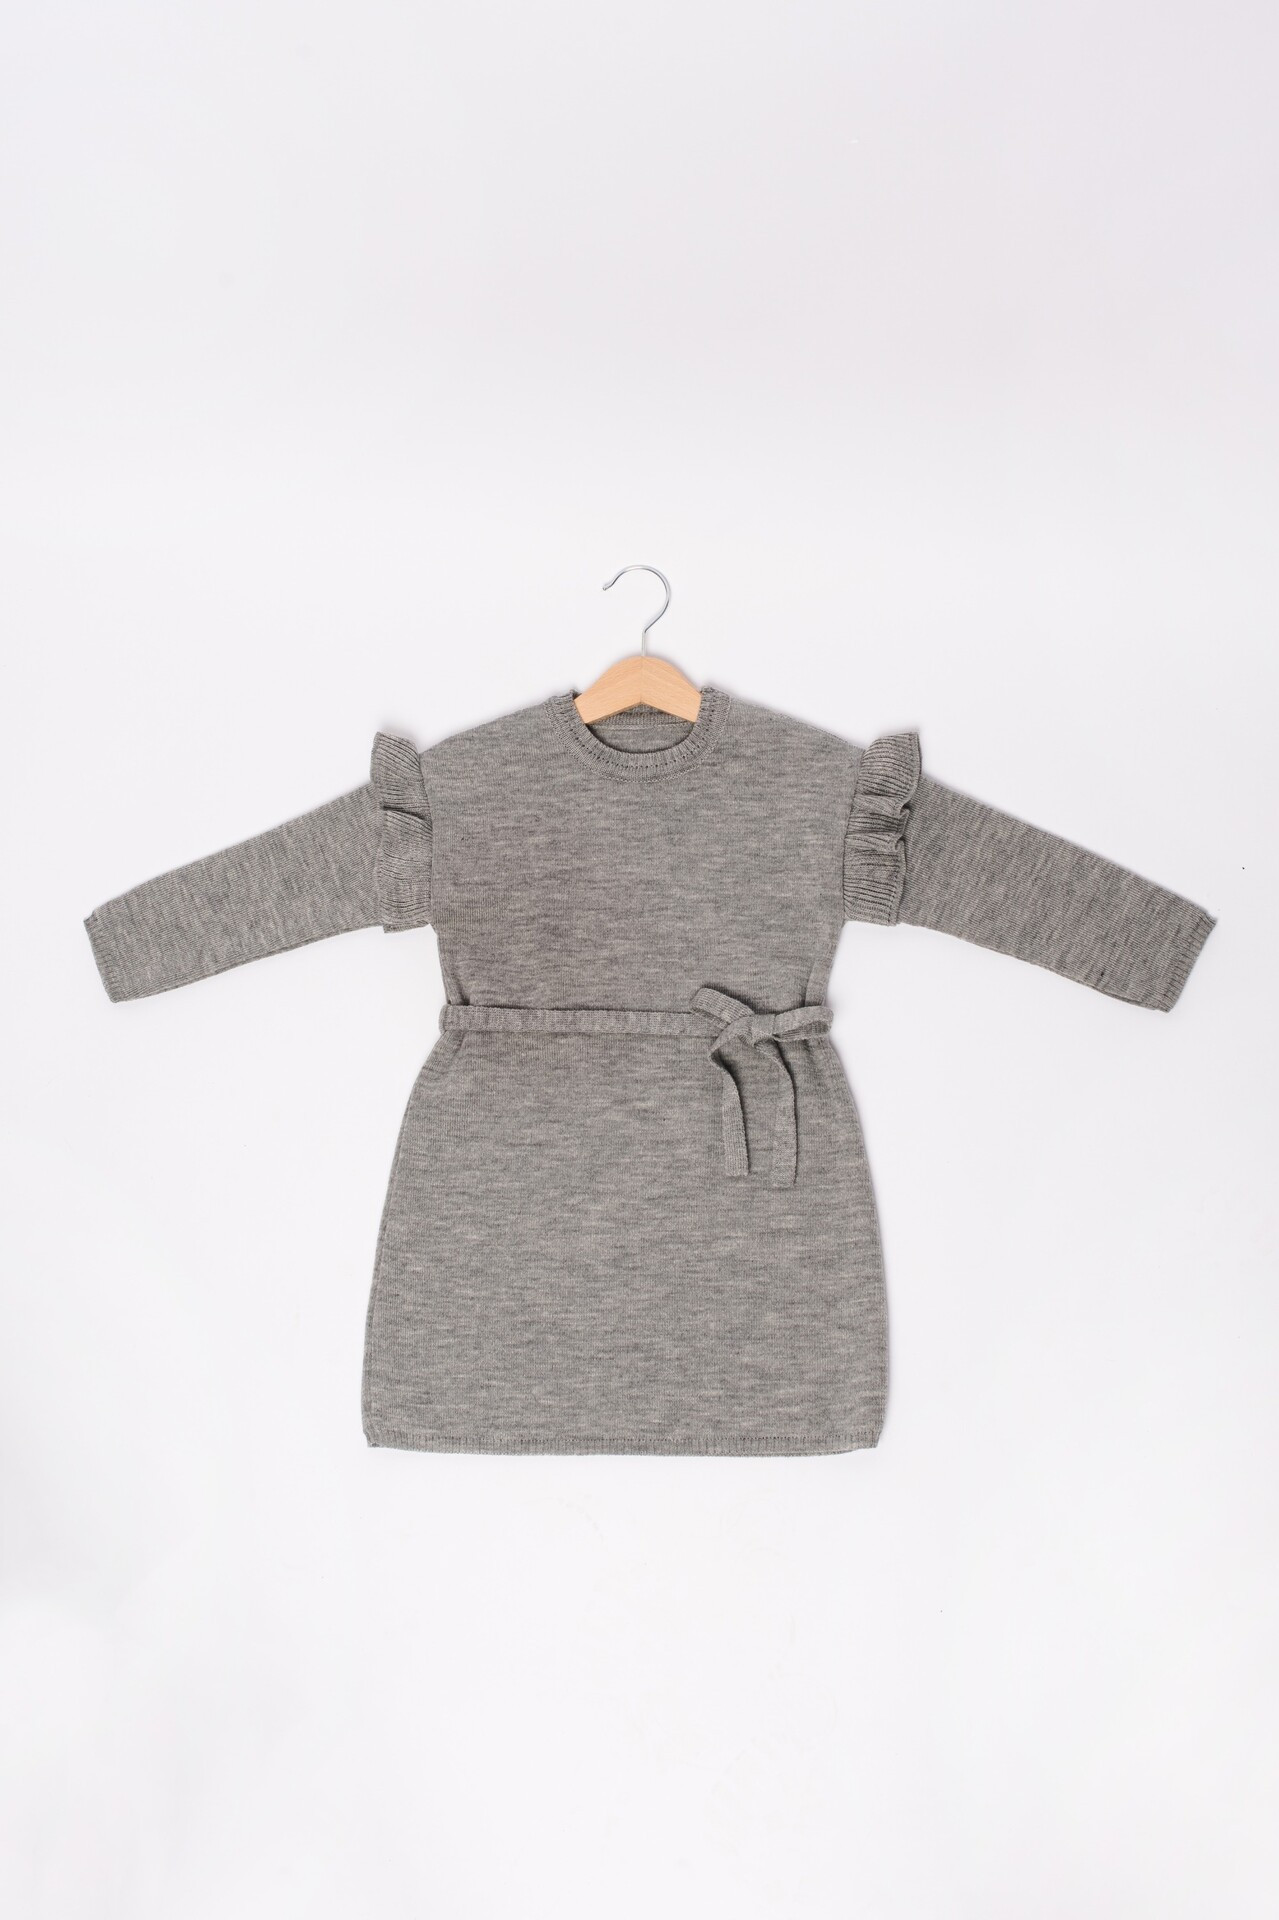 kids merino dress with modest design, suitable for everyday wear as well as for festive occasions. Sleeves are decorated with ruche details.